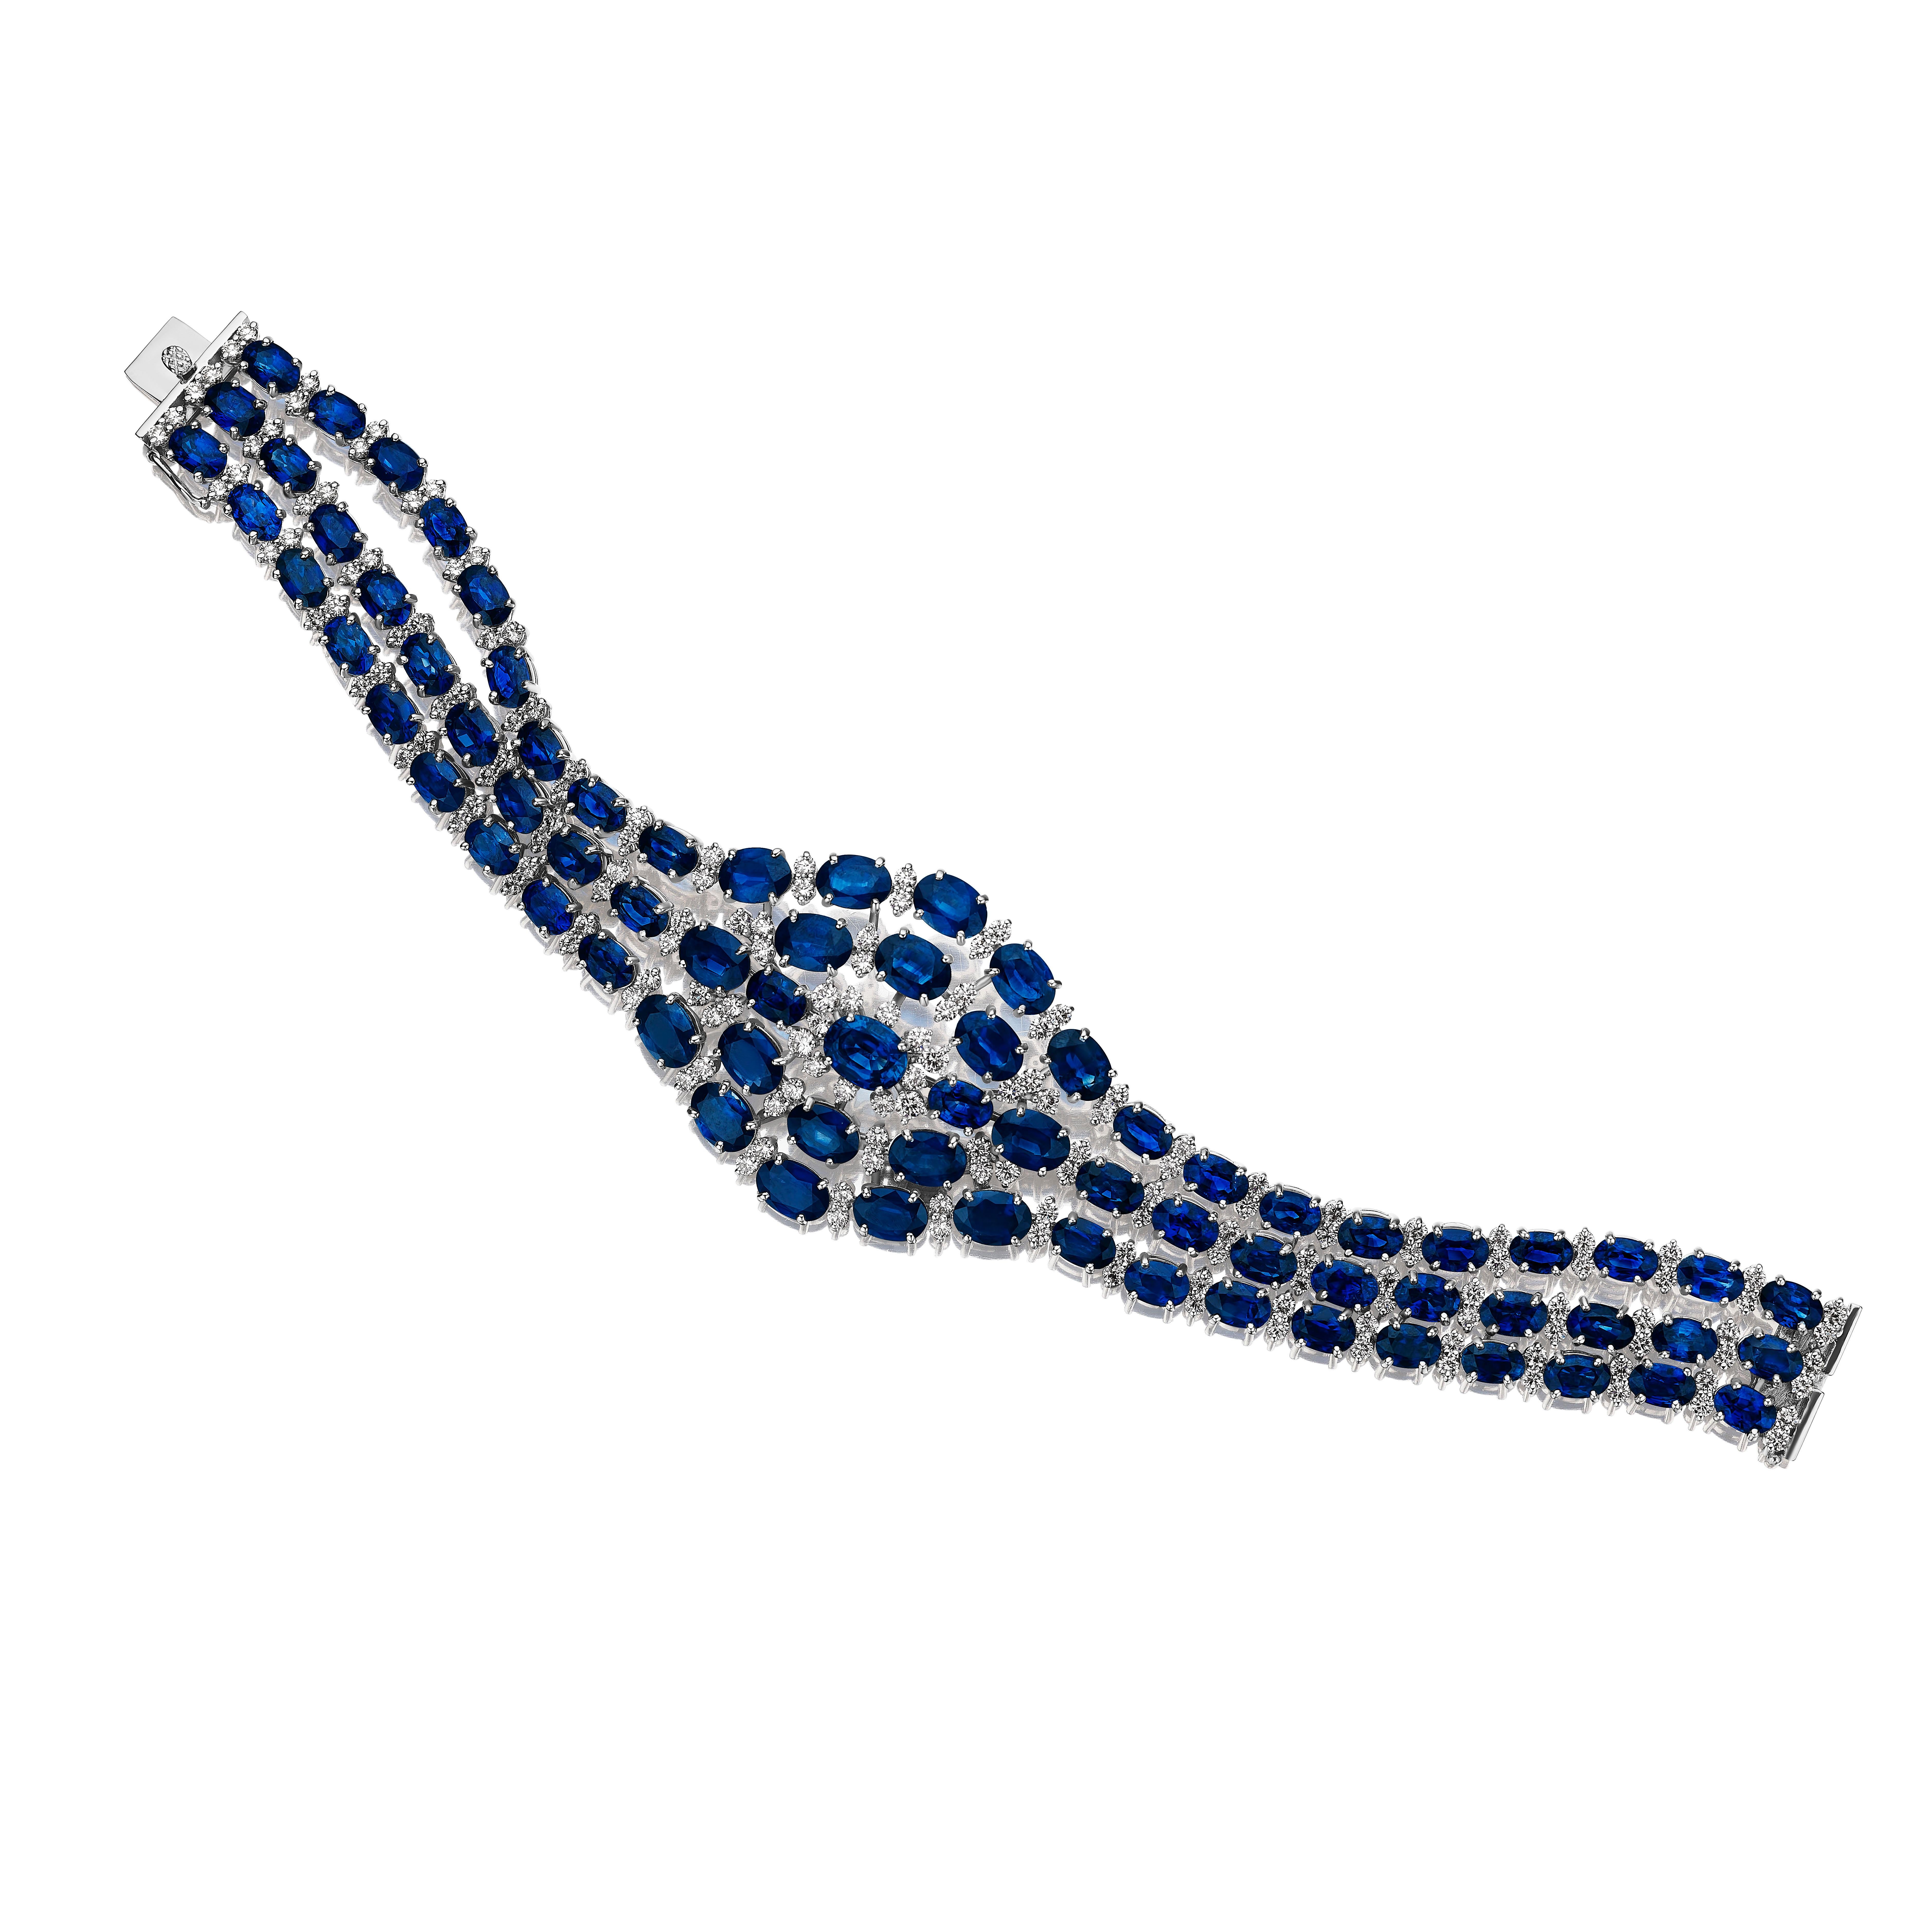 Modern 61.86ct Oval Sapphire & Round Diamond Bracelet in 18KT White Gold For Sale